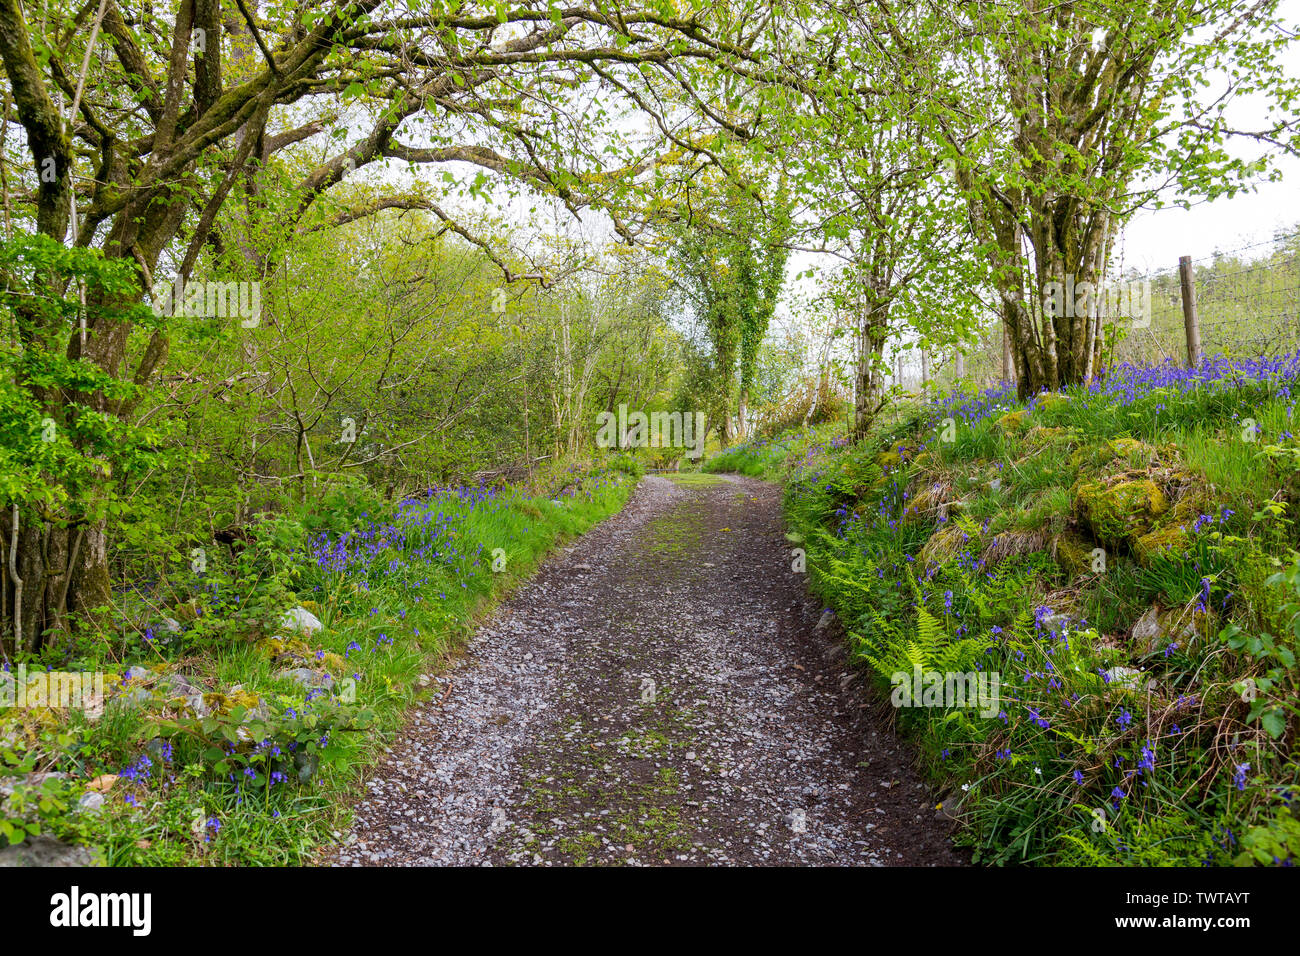 Wild bluebells grow under a canopy of ancient woodlands on the Four Waterfalls Walk in the Brecon Beacons National Park, Powys, Wales, UK Stock Photo